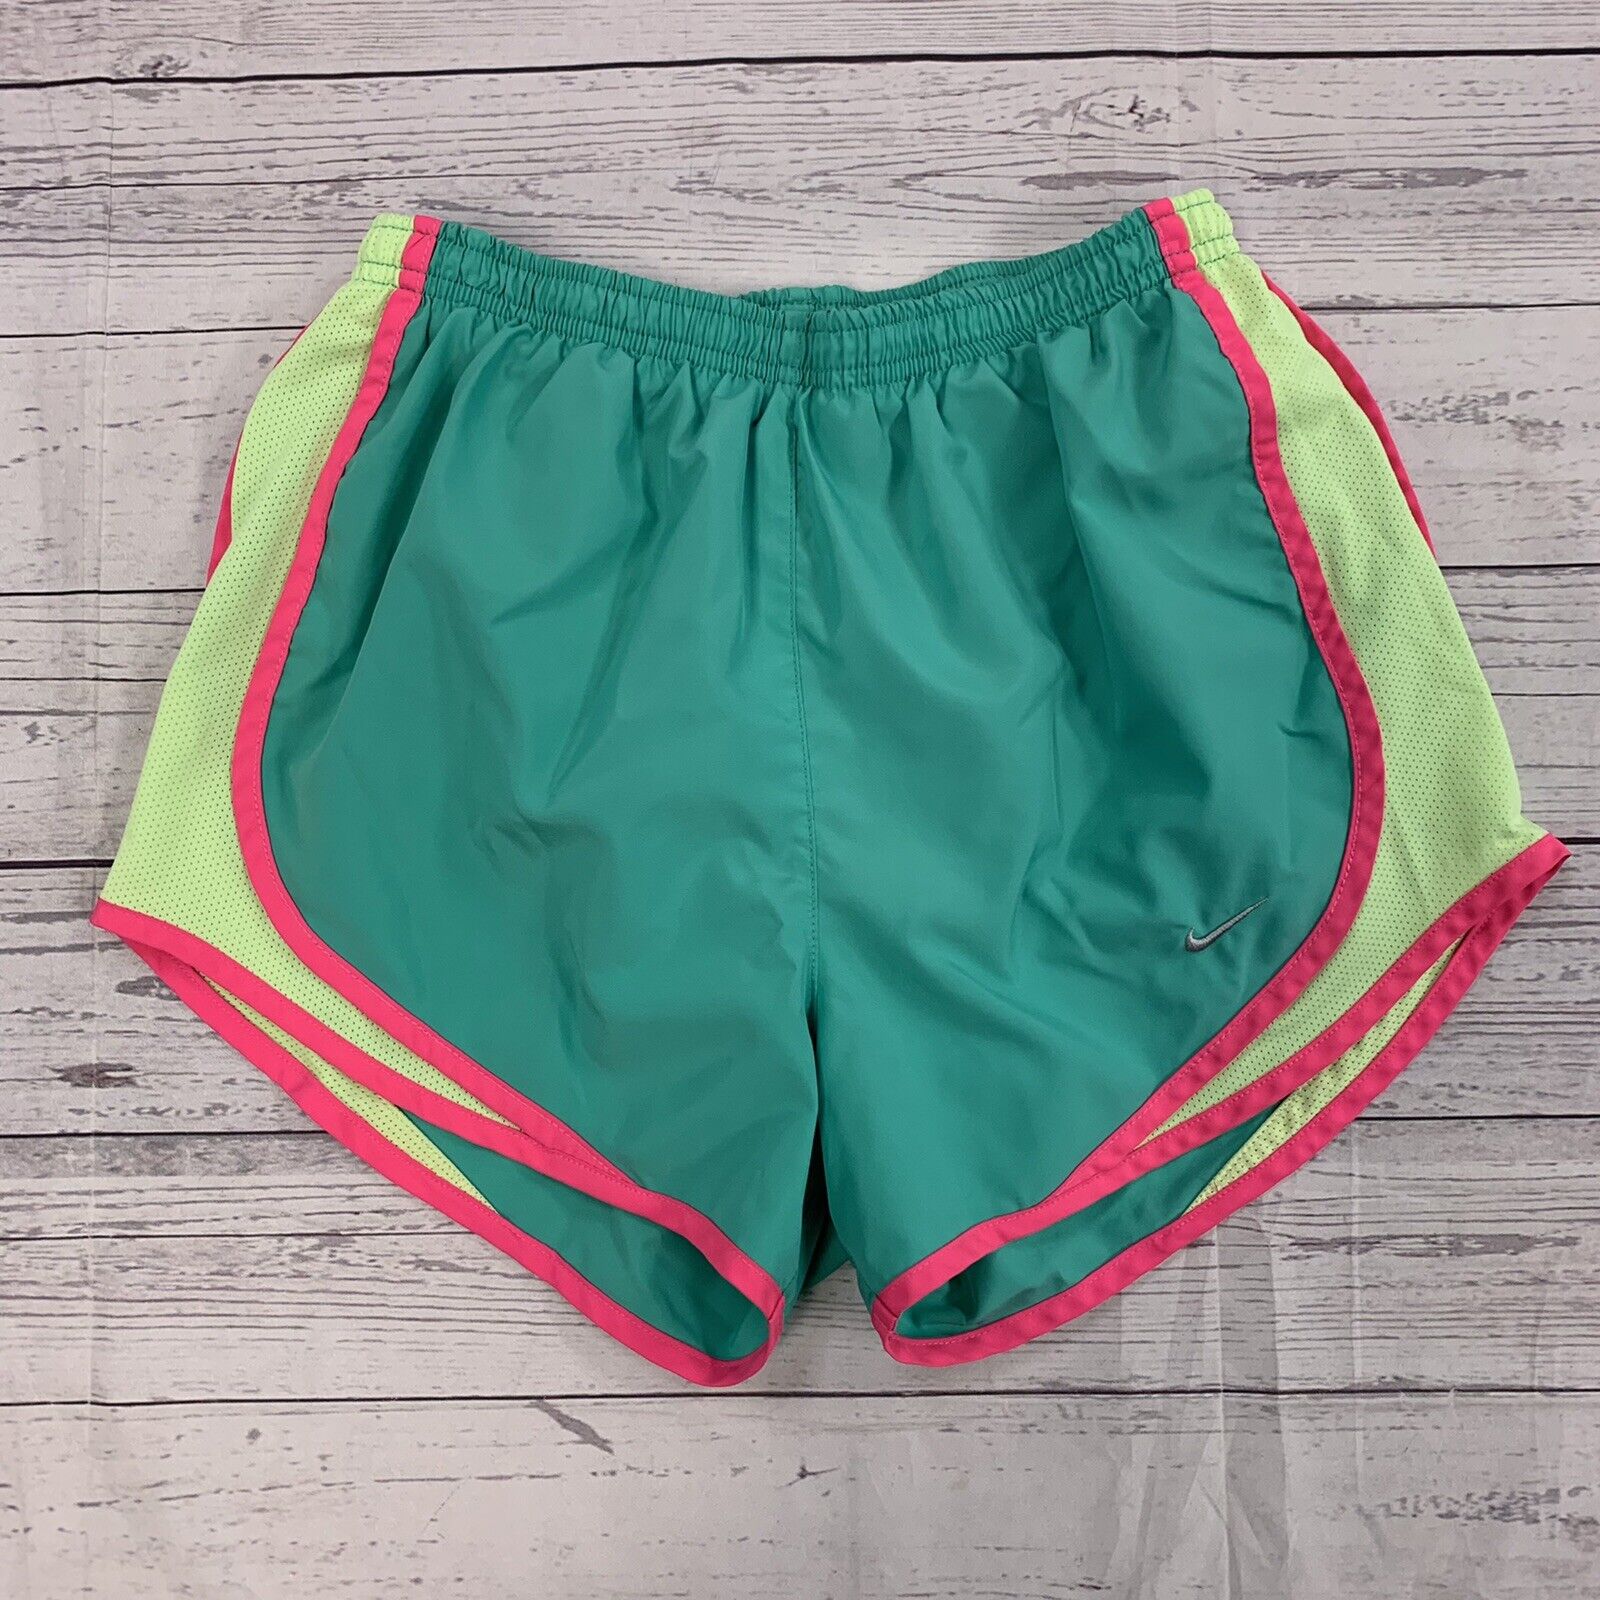 Nike Dri Fit Womens green/pink Athletic Shorts size small - beyond exchange